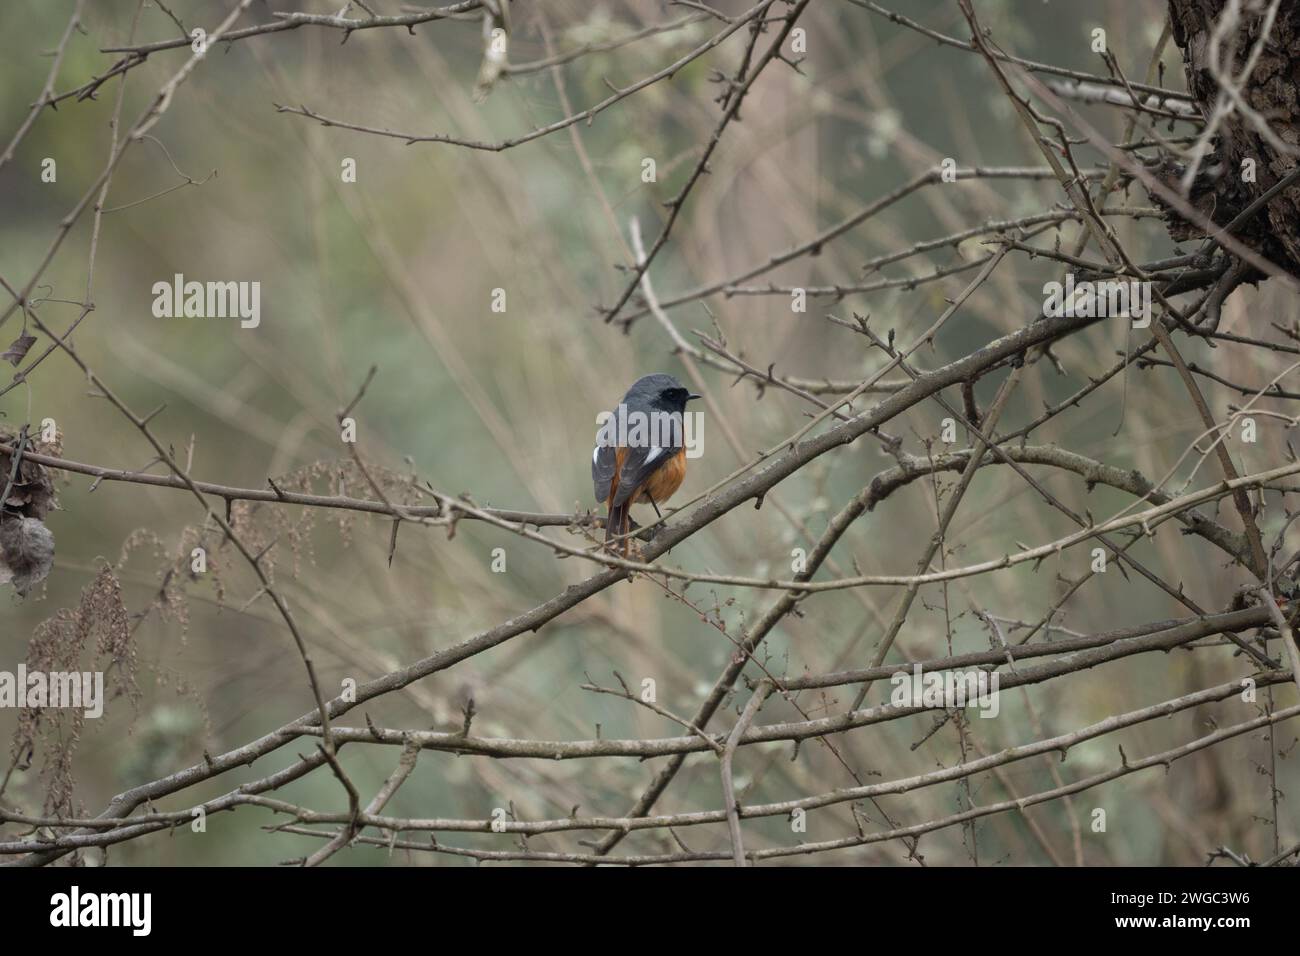 An environmental shot of a Hodgsons Redstart bird in the branches of a tree. Stock Photo